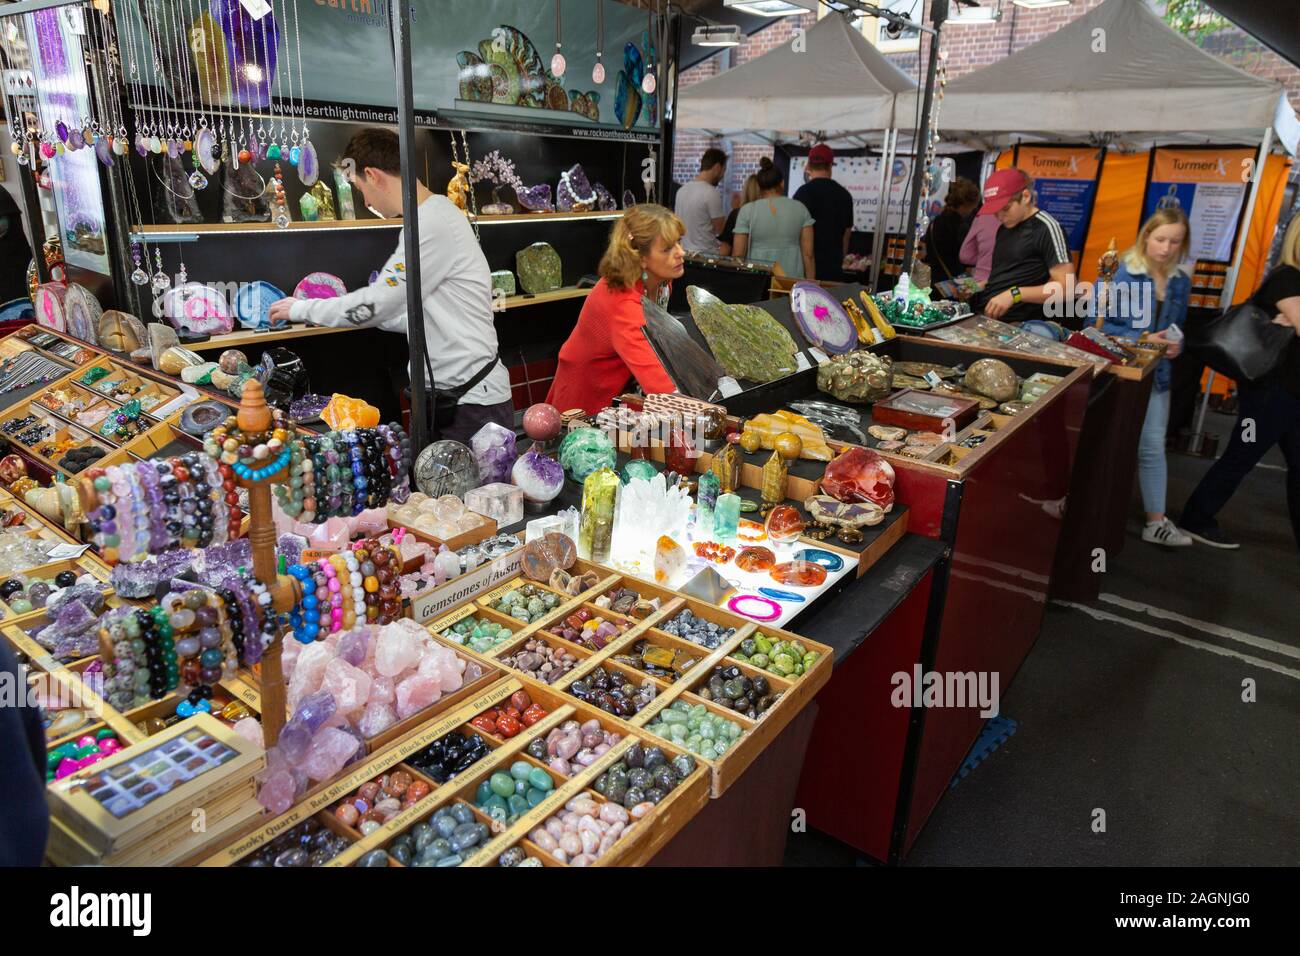 https://c8.alamy.com/comp/2AGNJG0/the-rocks-market-sydney-australia-traders-selling-colourful-minerals-at-a-craft-stall-sydney-new-south-wales-australia-2AGNJG0.jpg